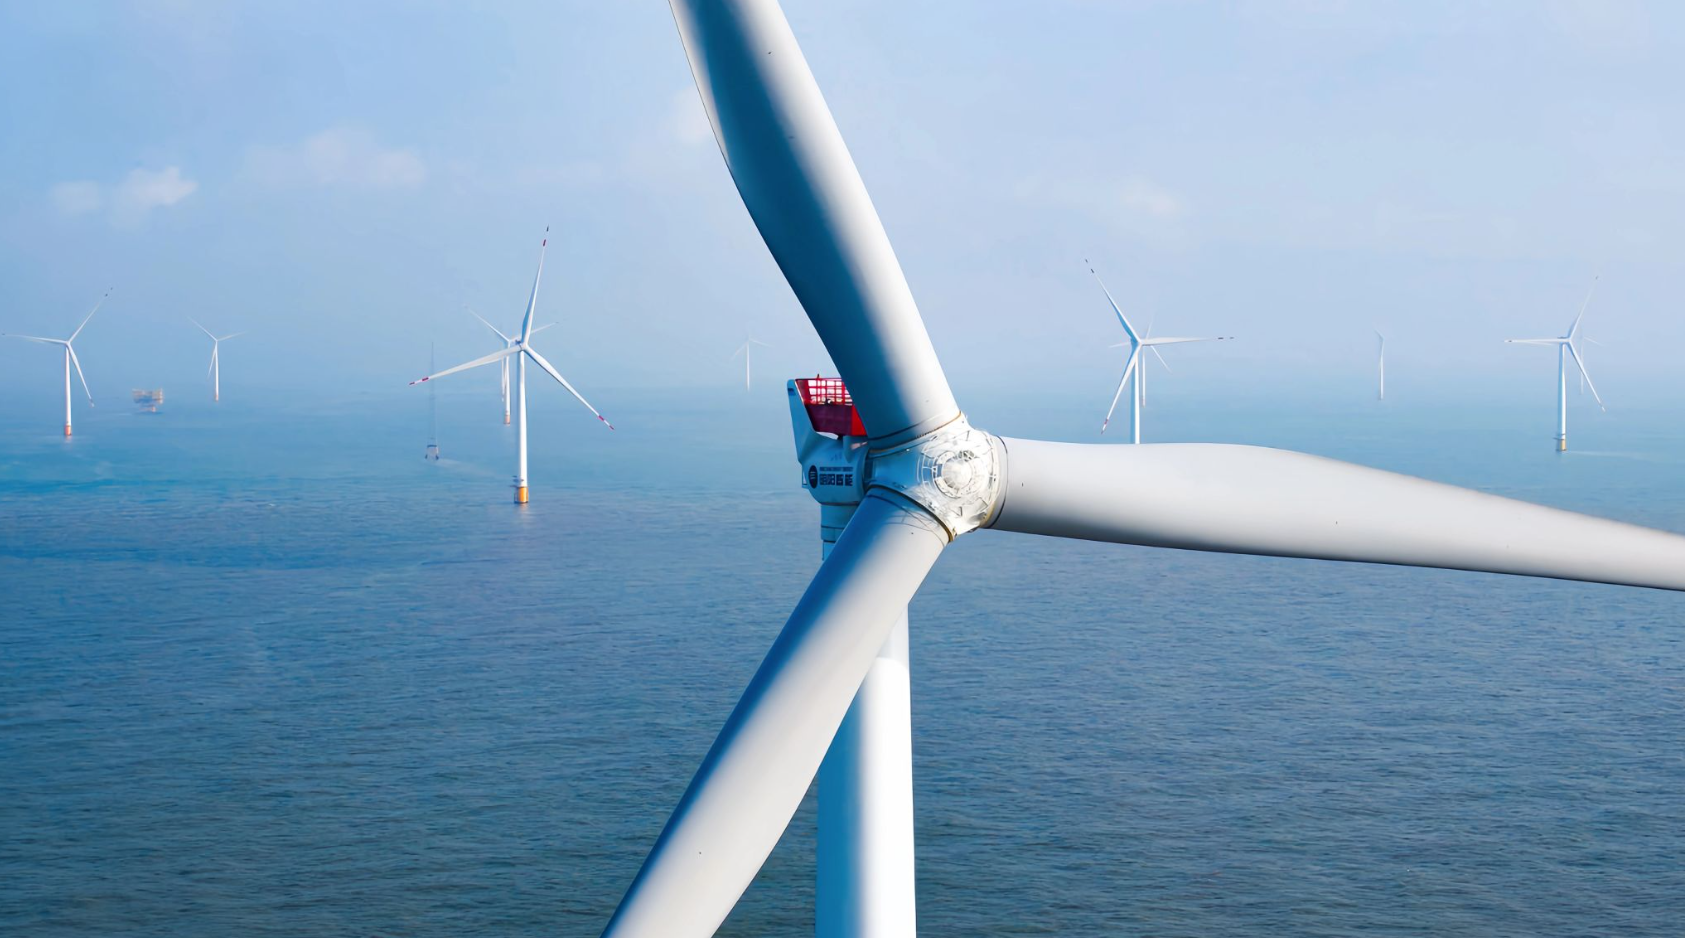 Mingyang Goes Beyond 18 MW with New Offshore Wind Turbine